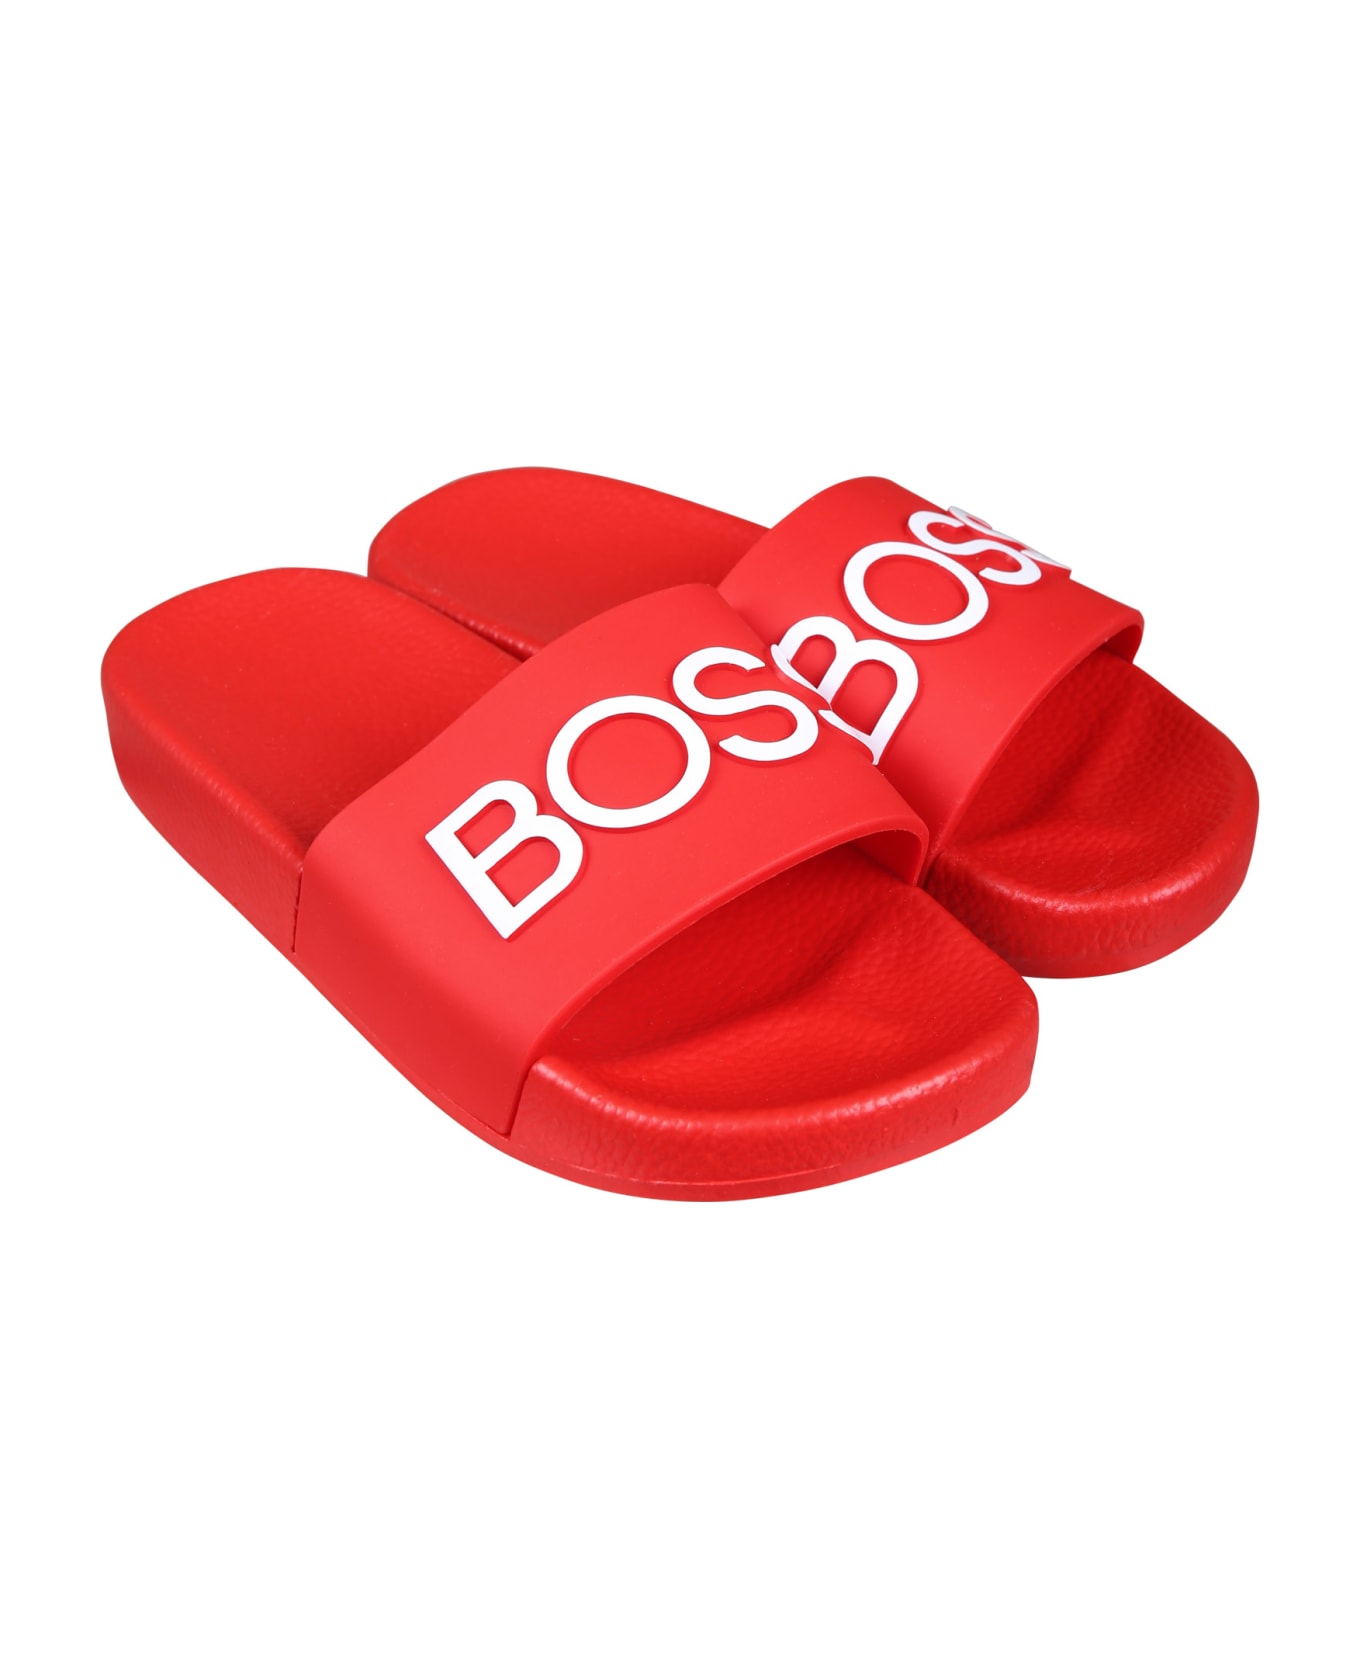 Hugo Boss Red Slippers For Boy With Logo - Red